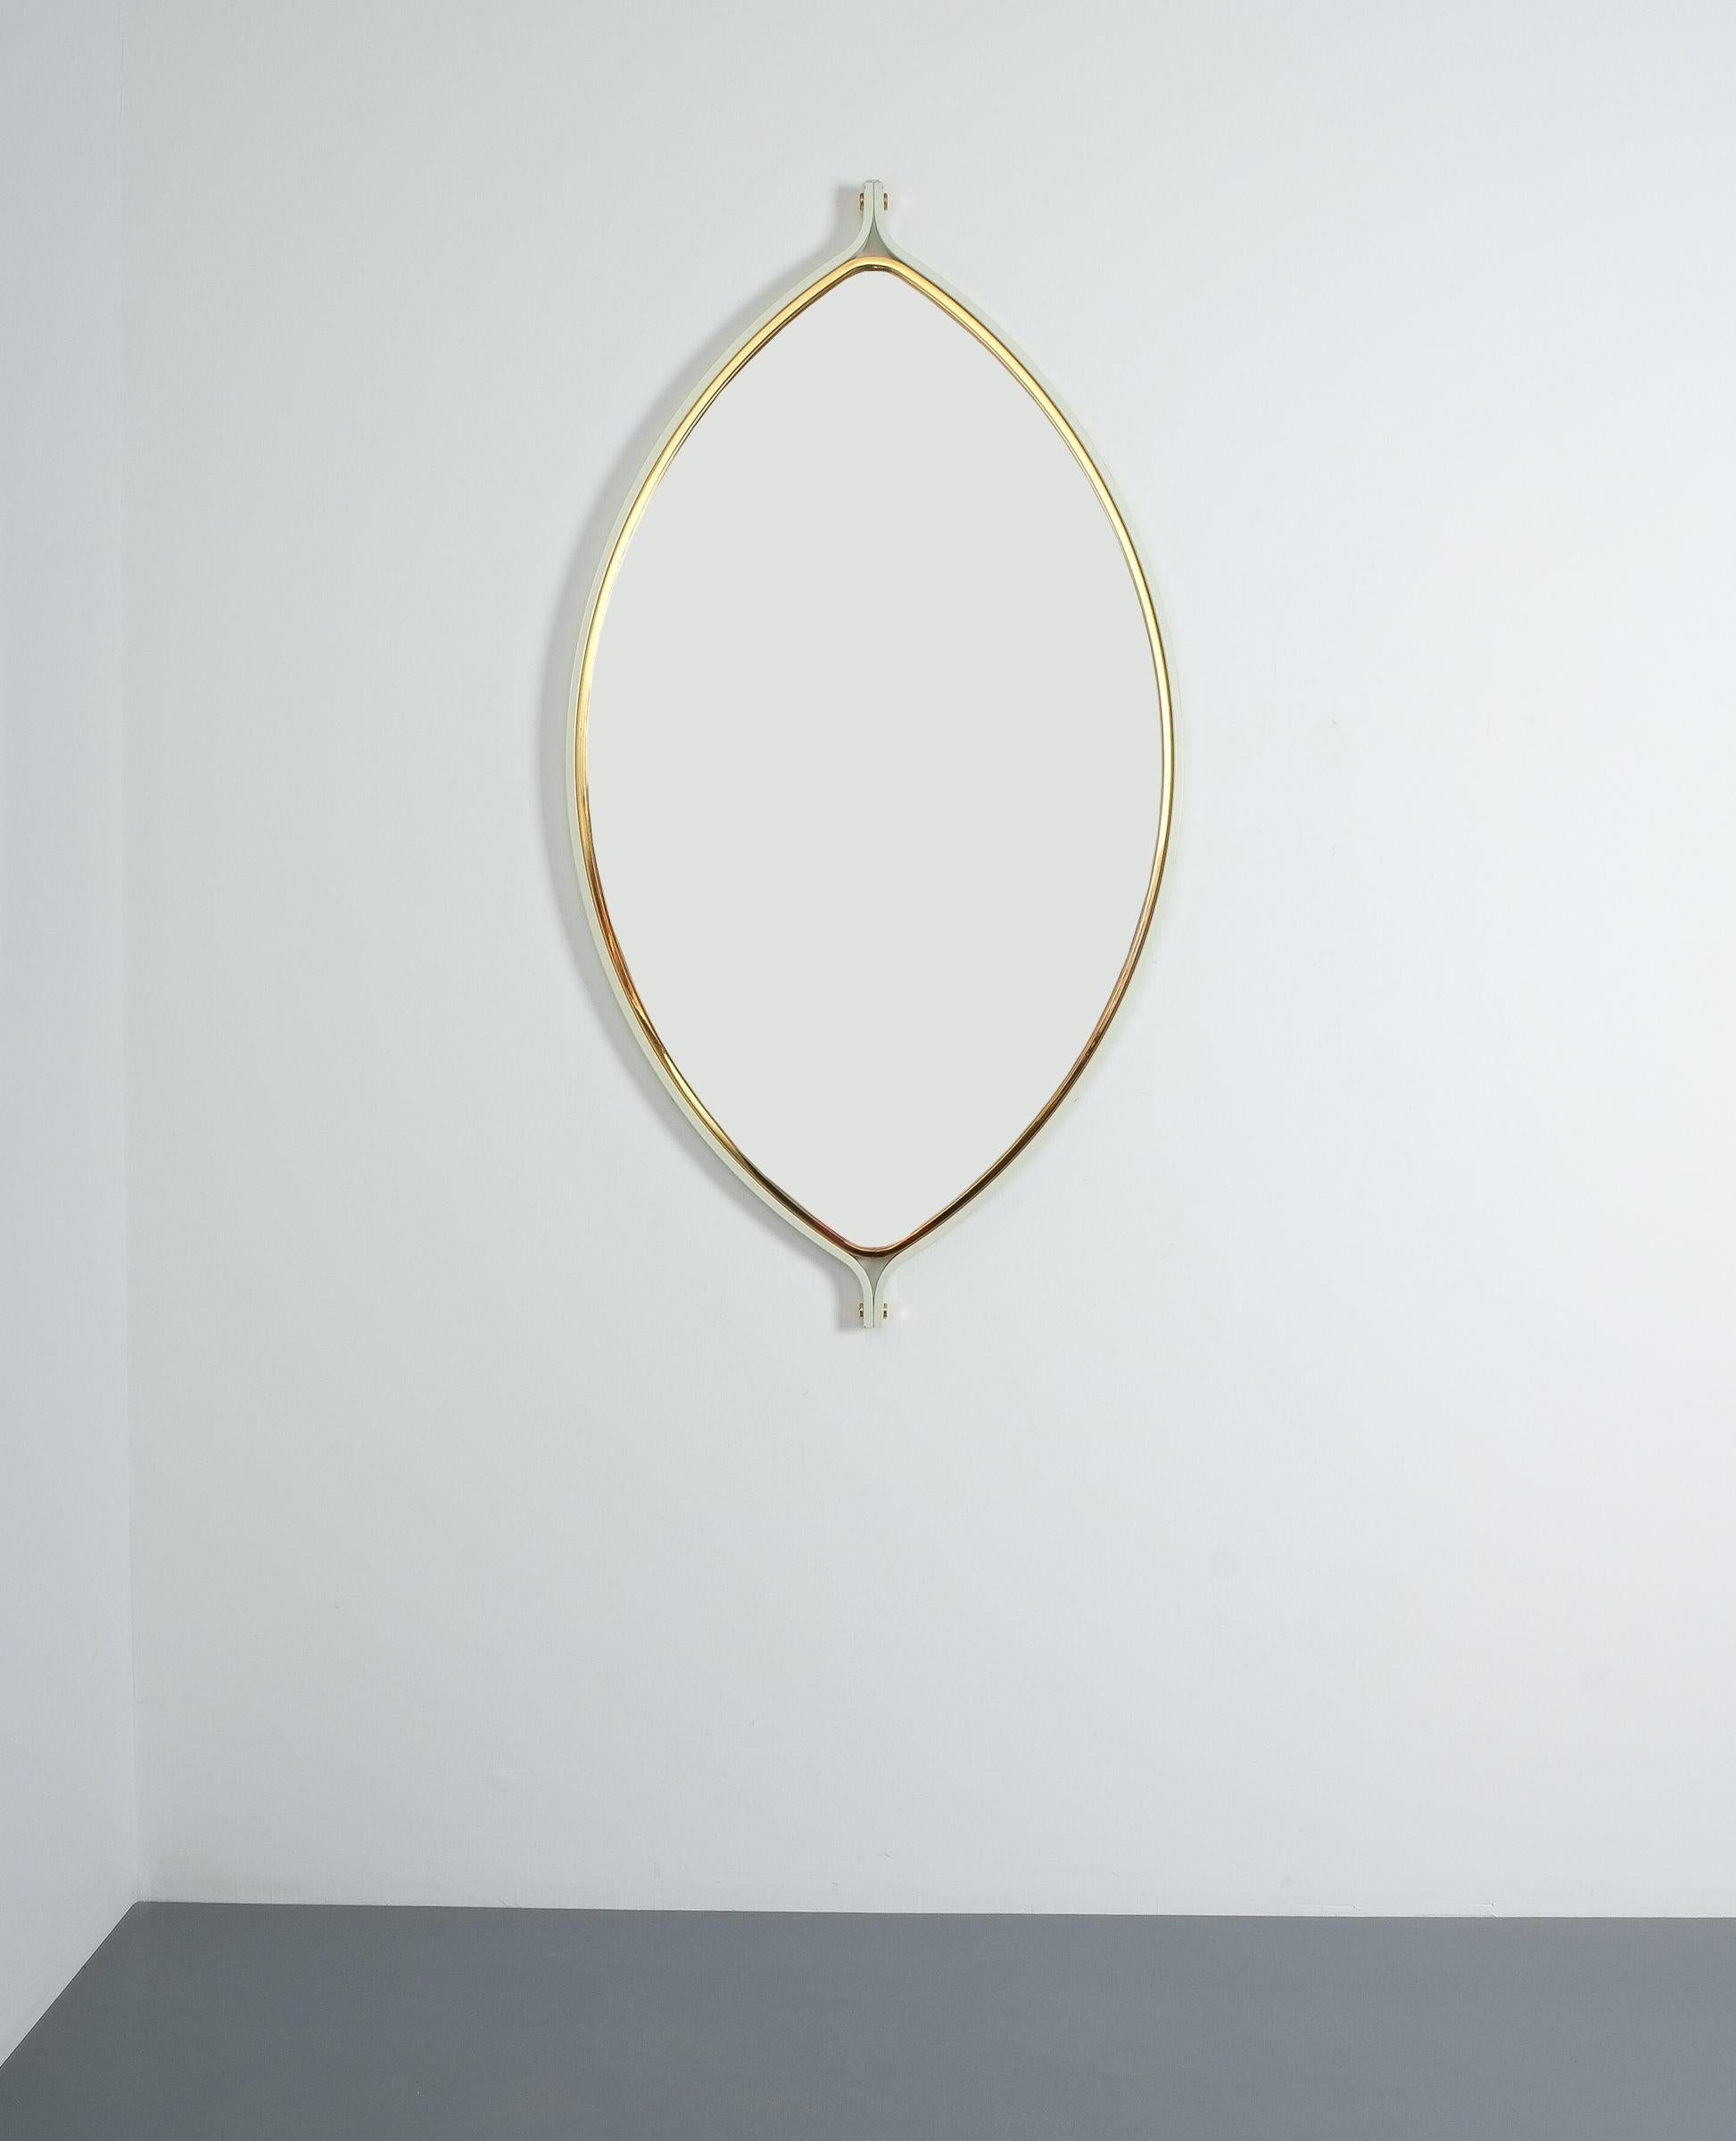 Elliptical vintage lens mirror midcentury, Italy, circa 1970

Rare mirror comprised of 2 layers of brass and white lacquered metal. Good condition, some stains and superficial scratches on the mirror glass.

Dimensions 44.88